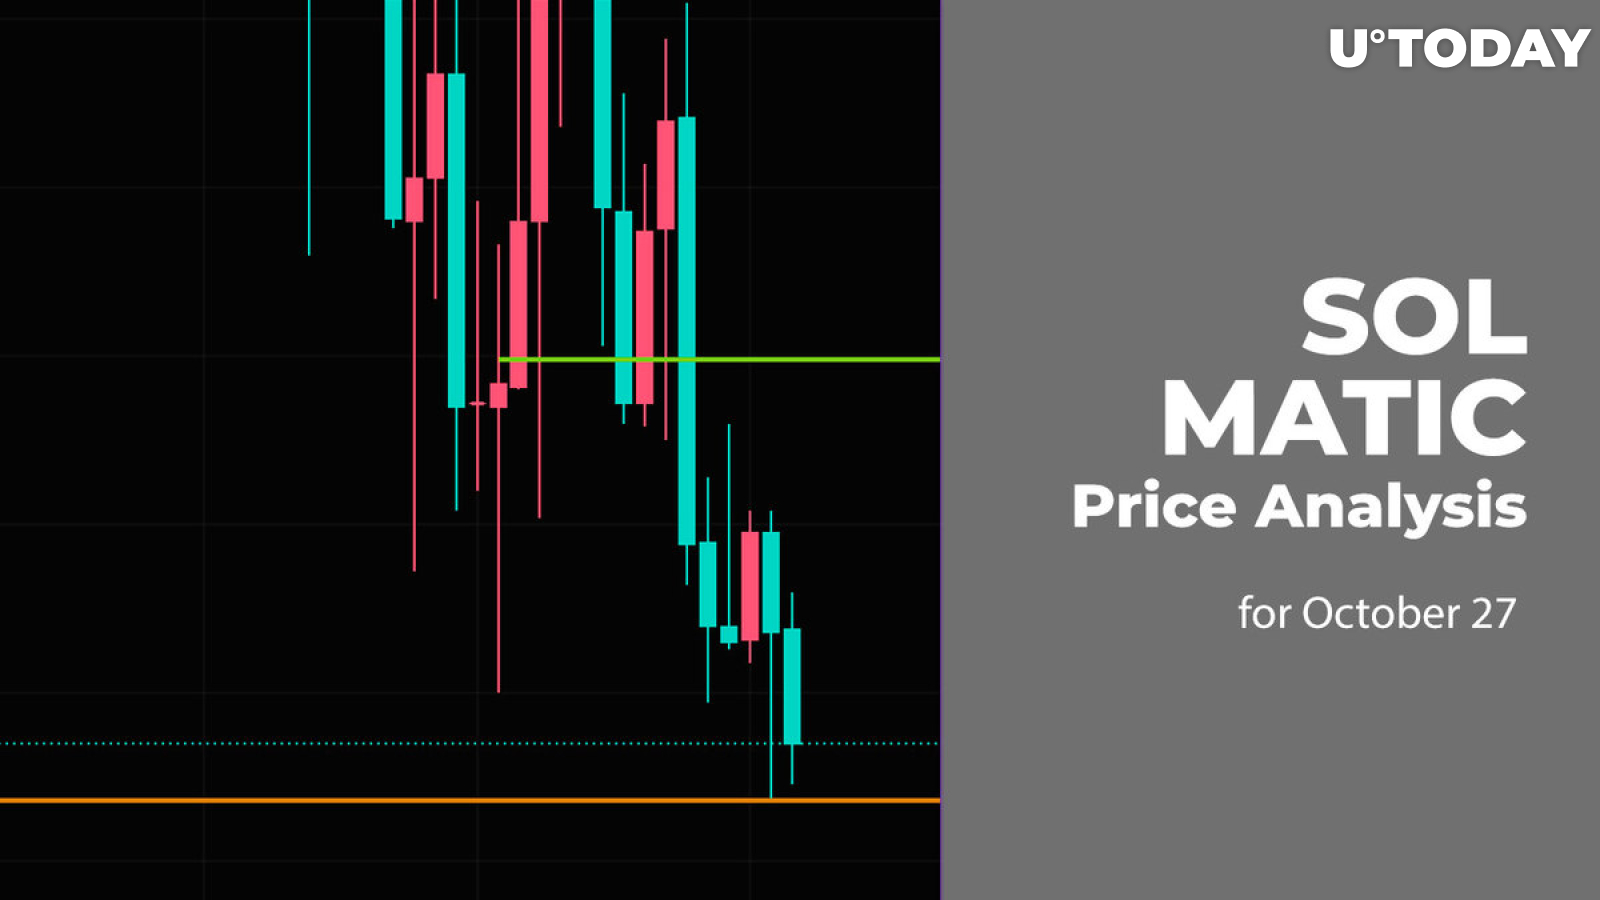 SOL and MATIC Price Analysis for October 27